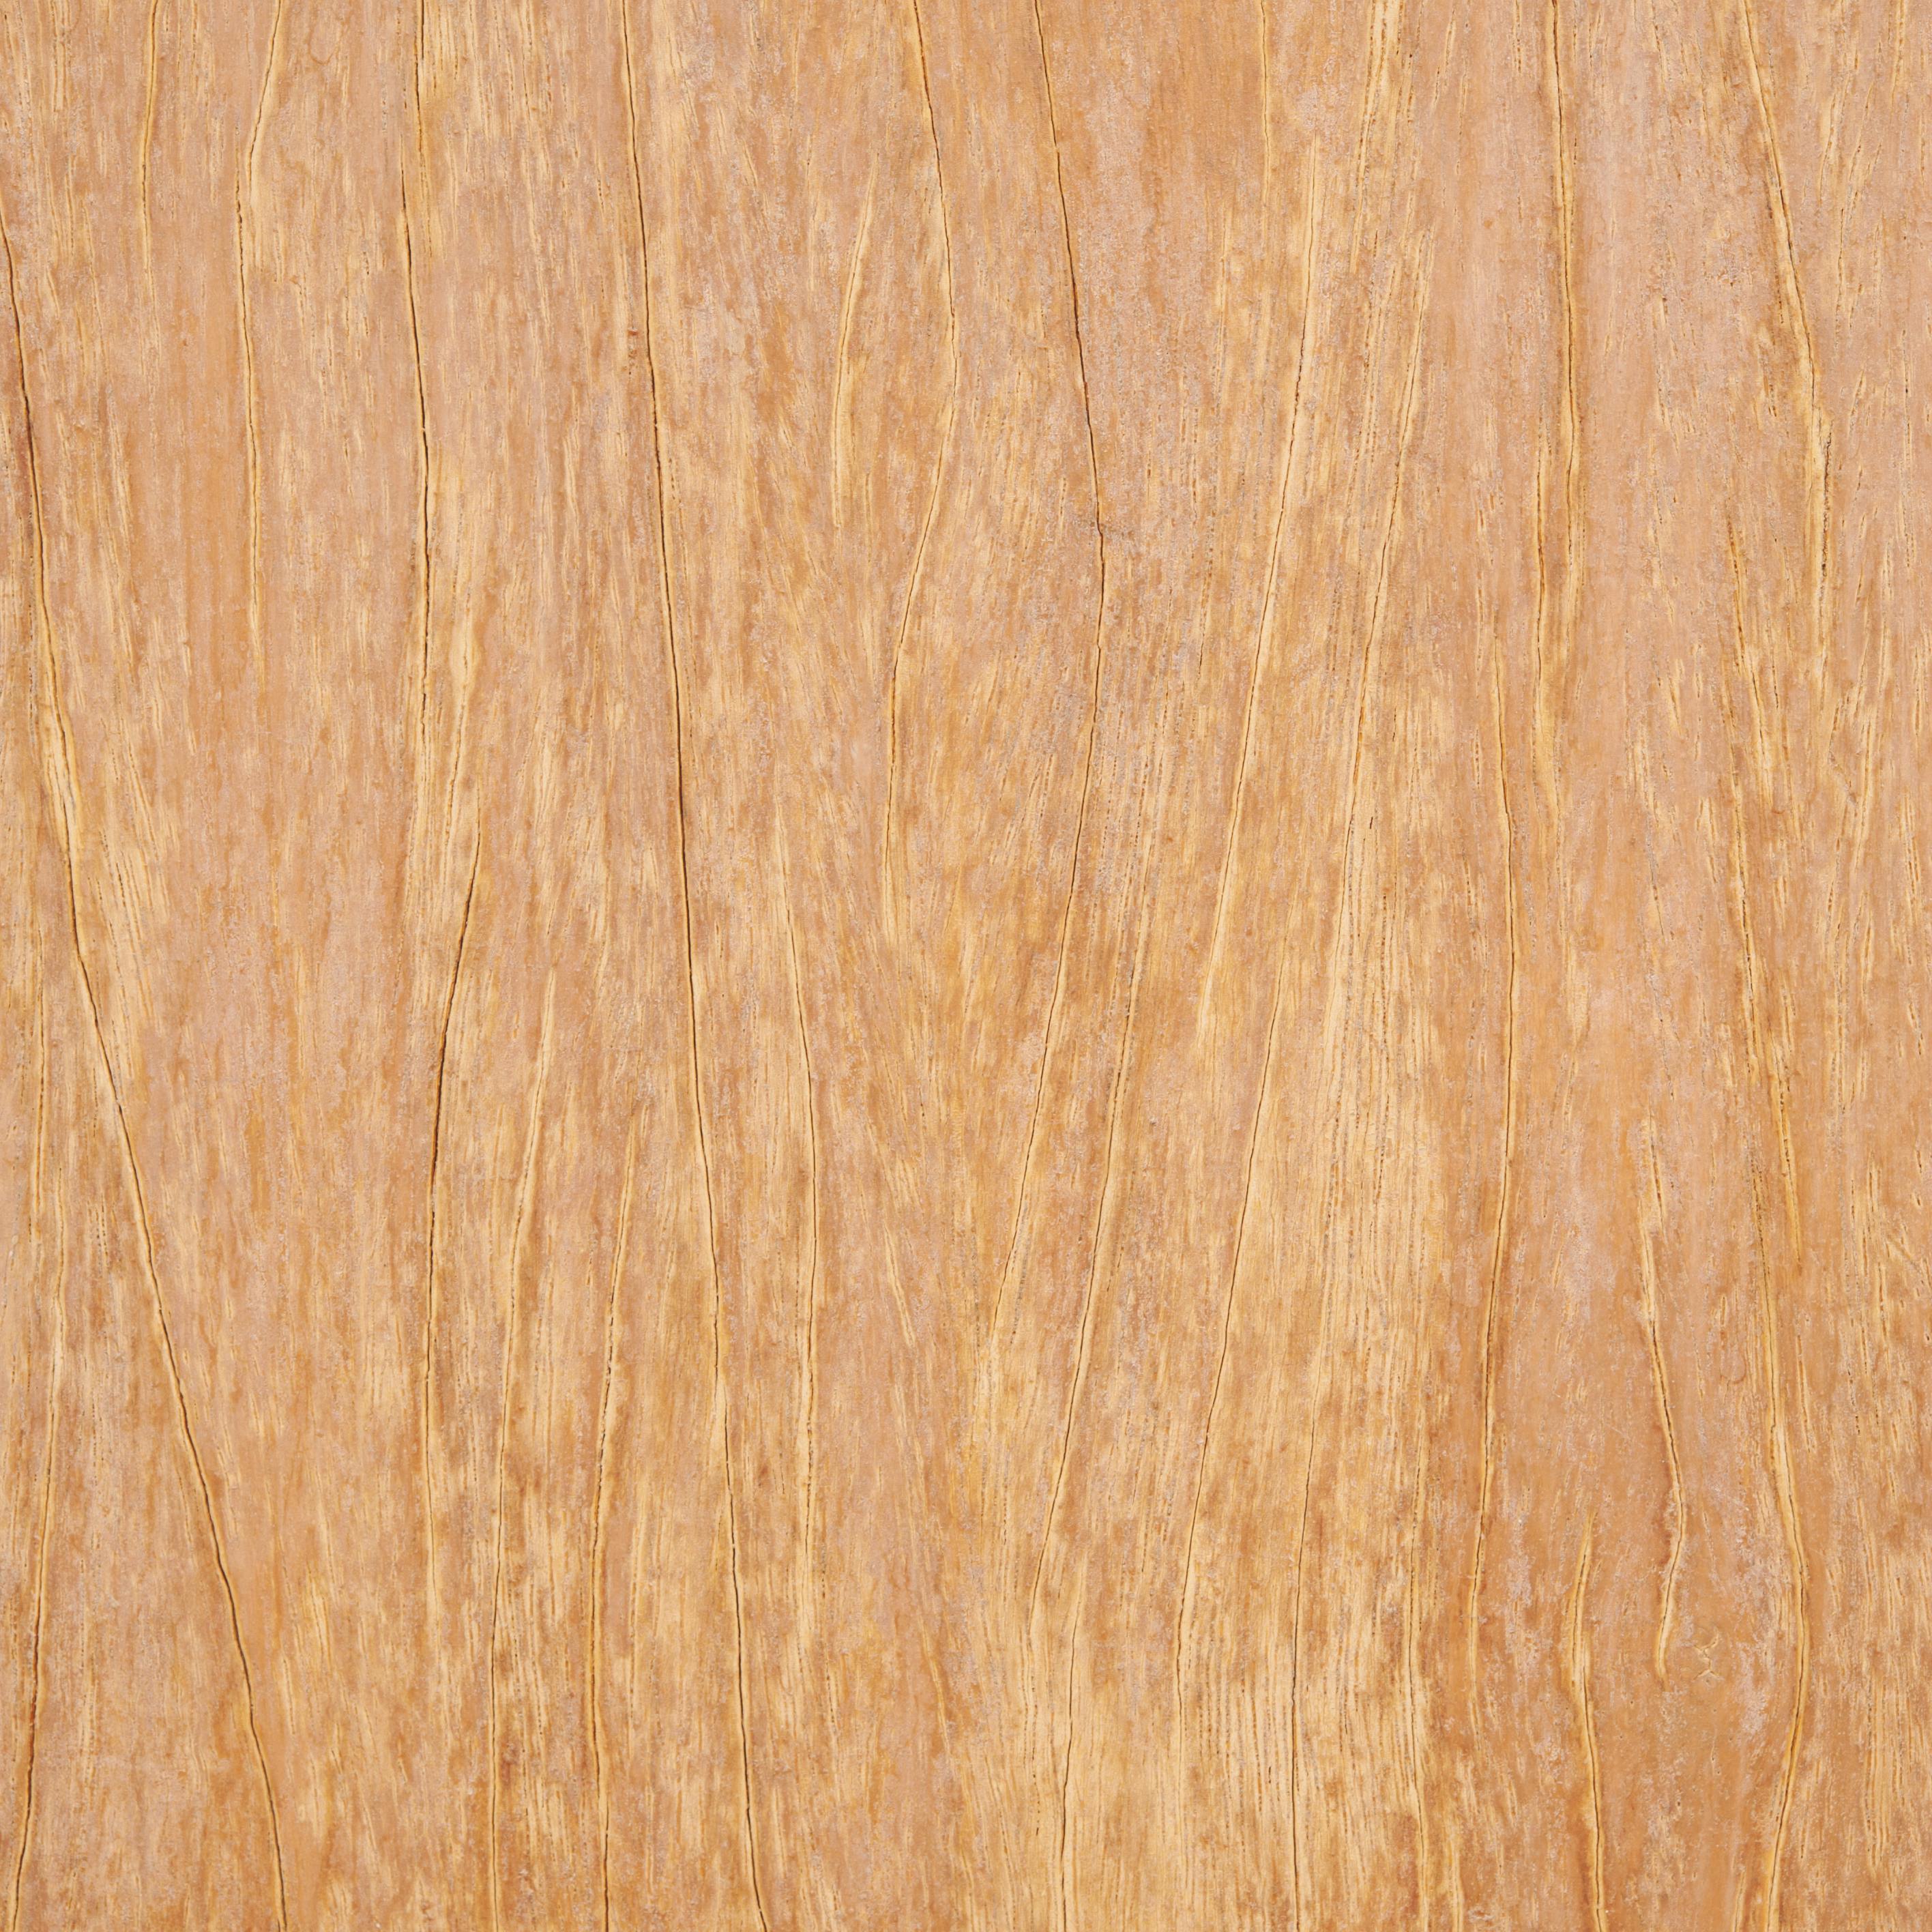 Brown Wooden Board · Free Stock Photo